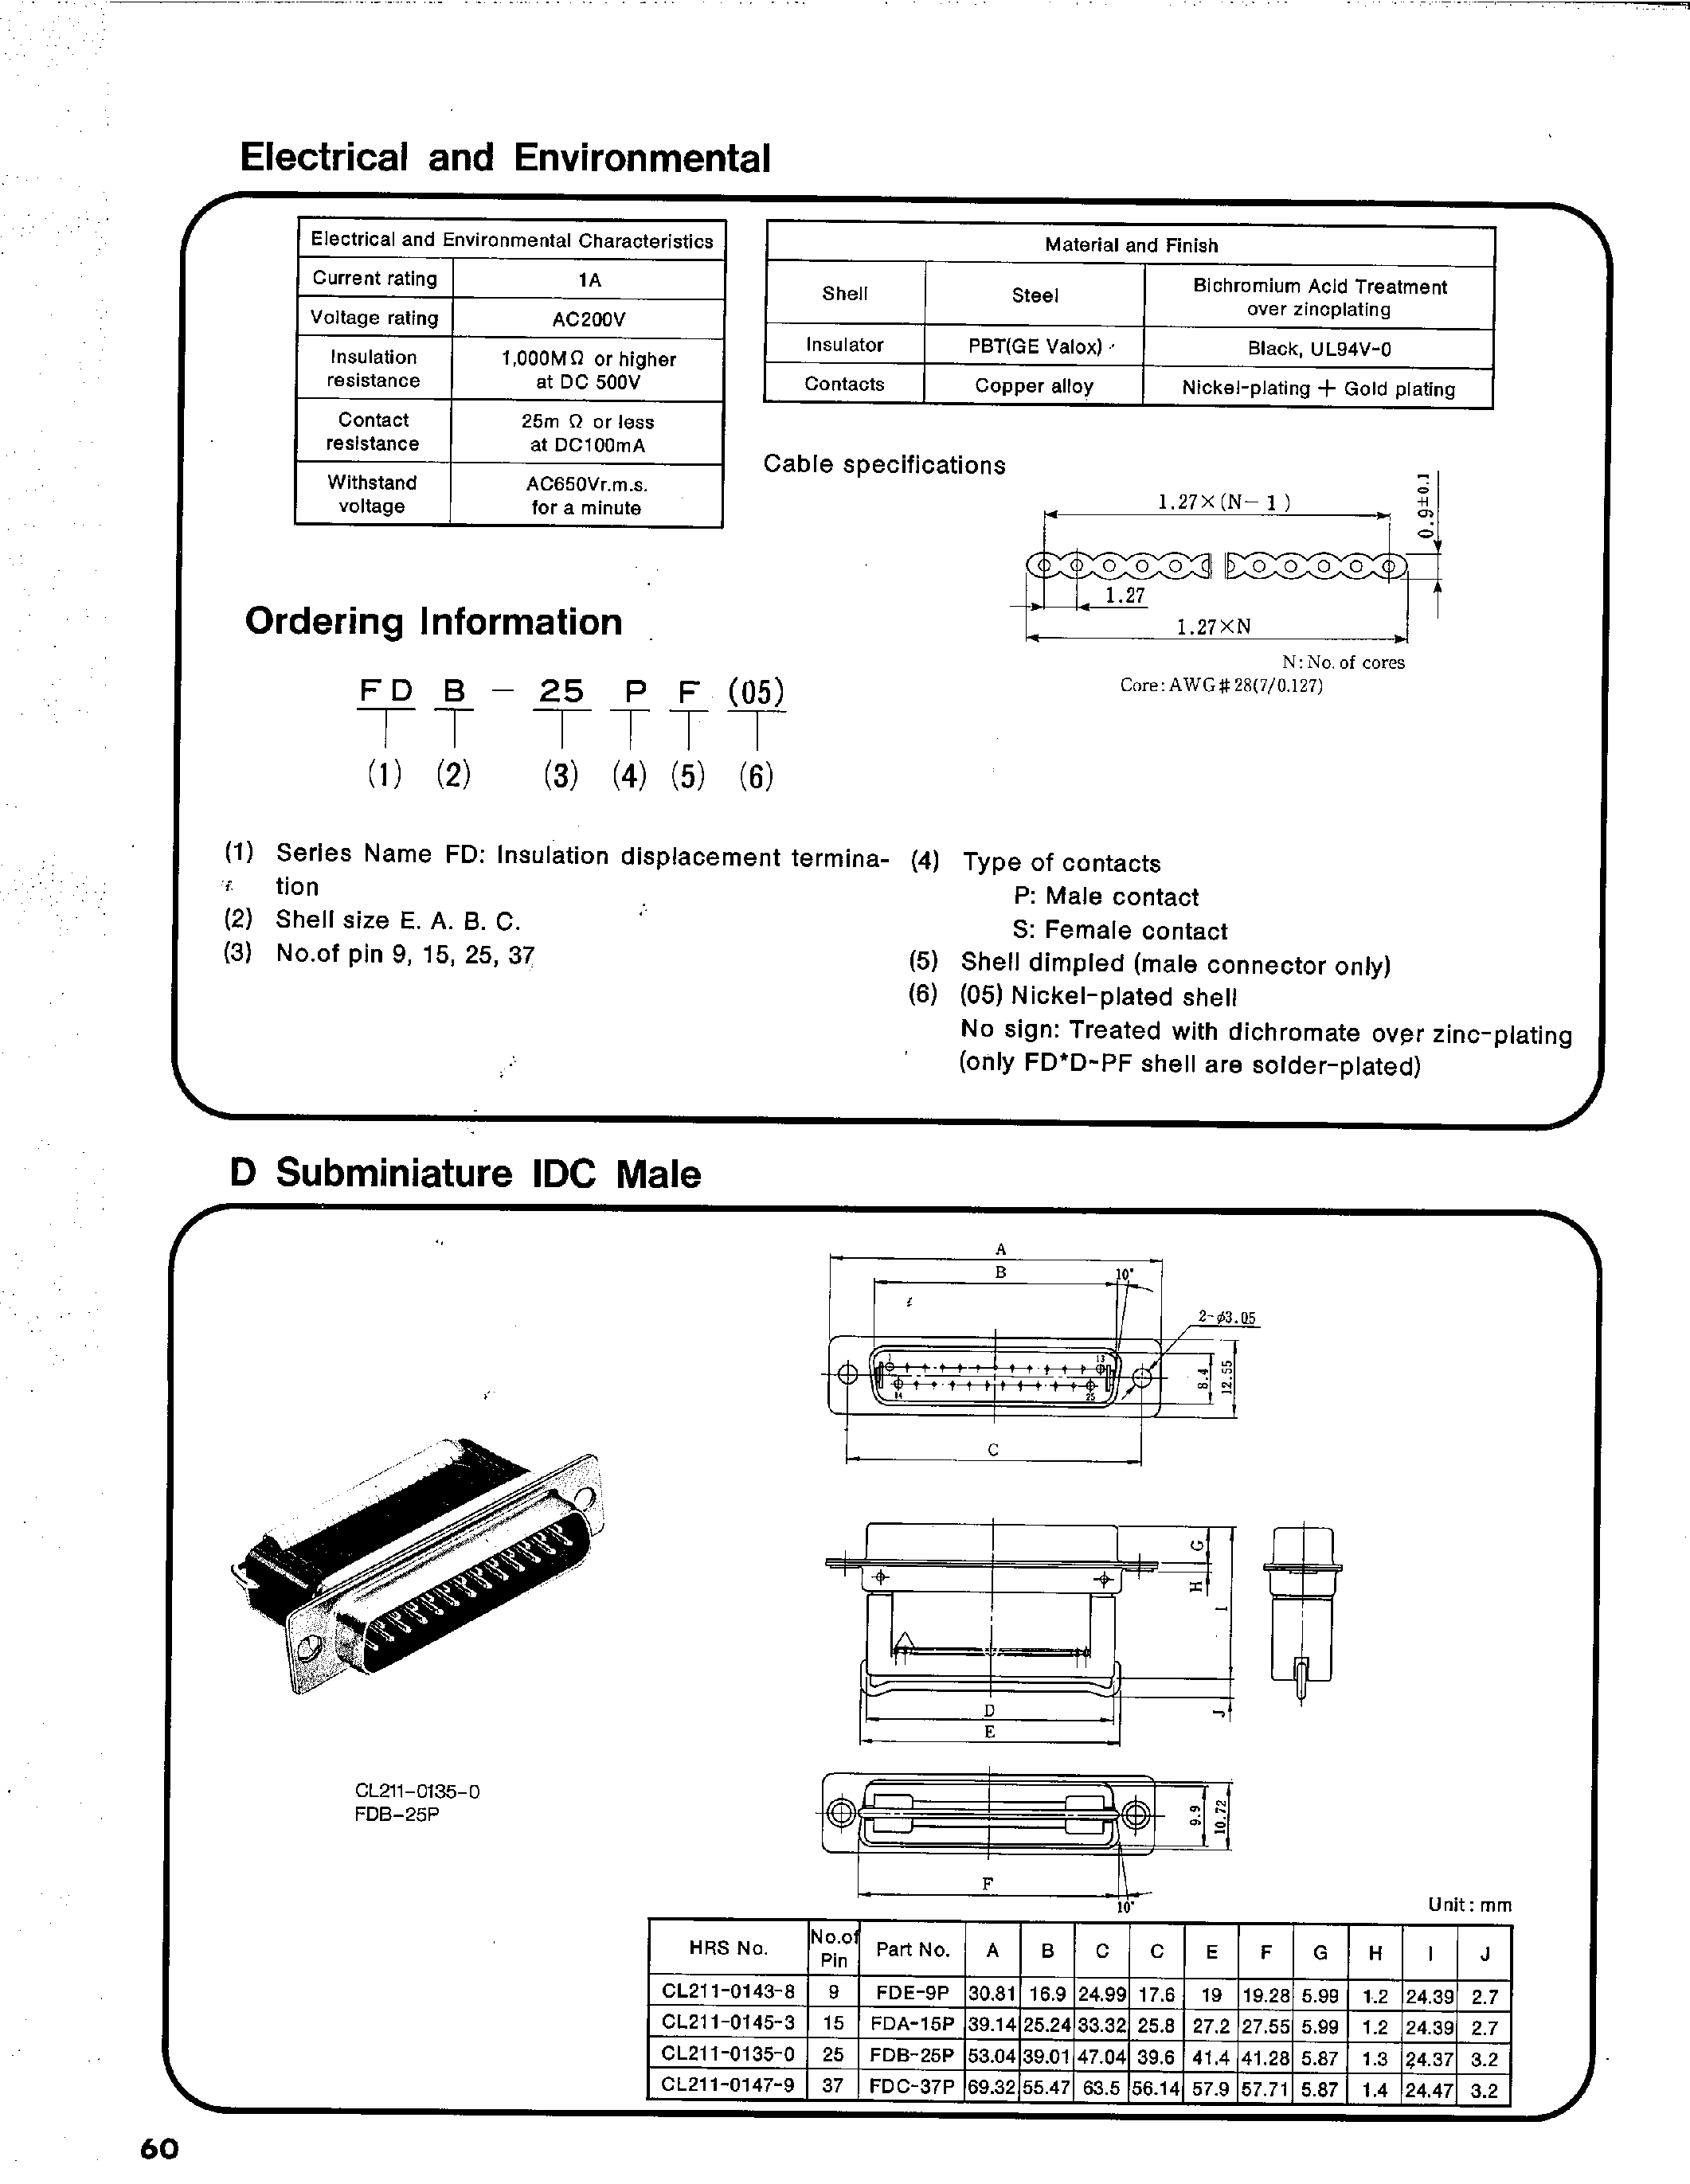 Datasheet FDE-37SF - FD TYPE CONNECTOR FOR RIBBON CABLE page 2